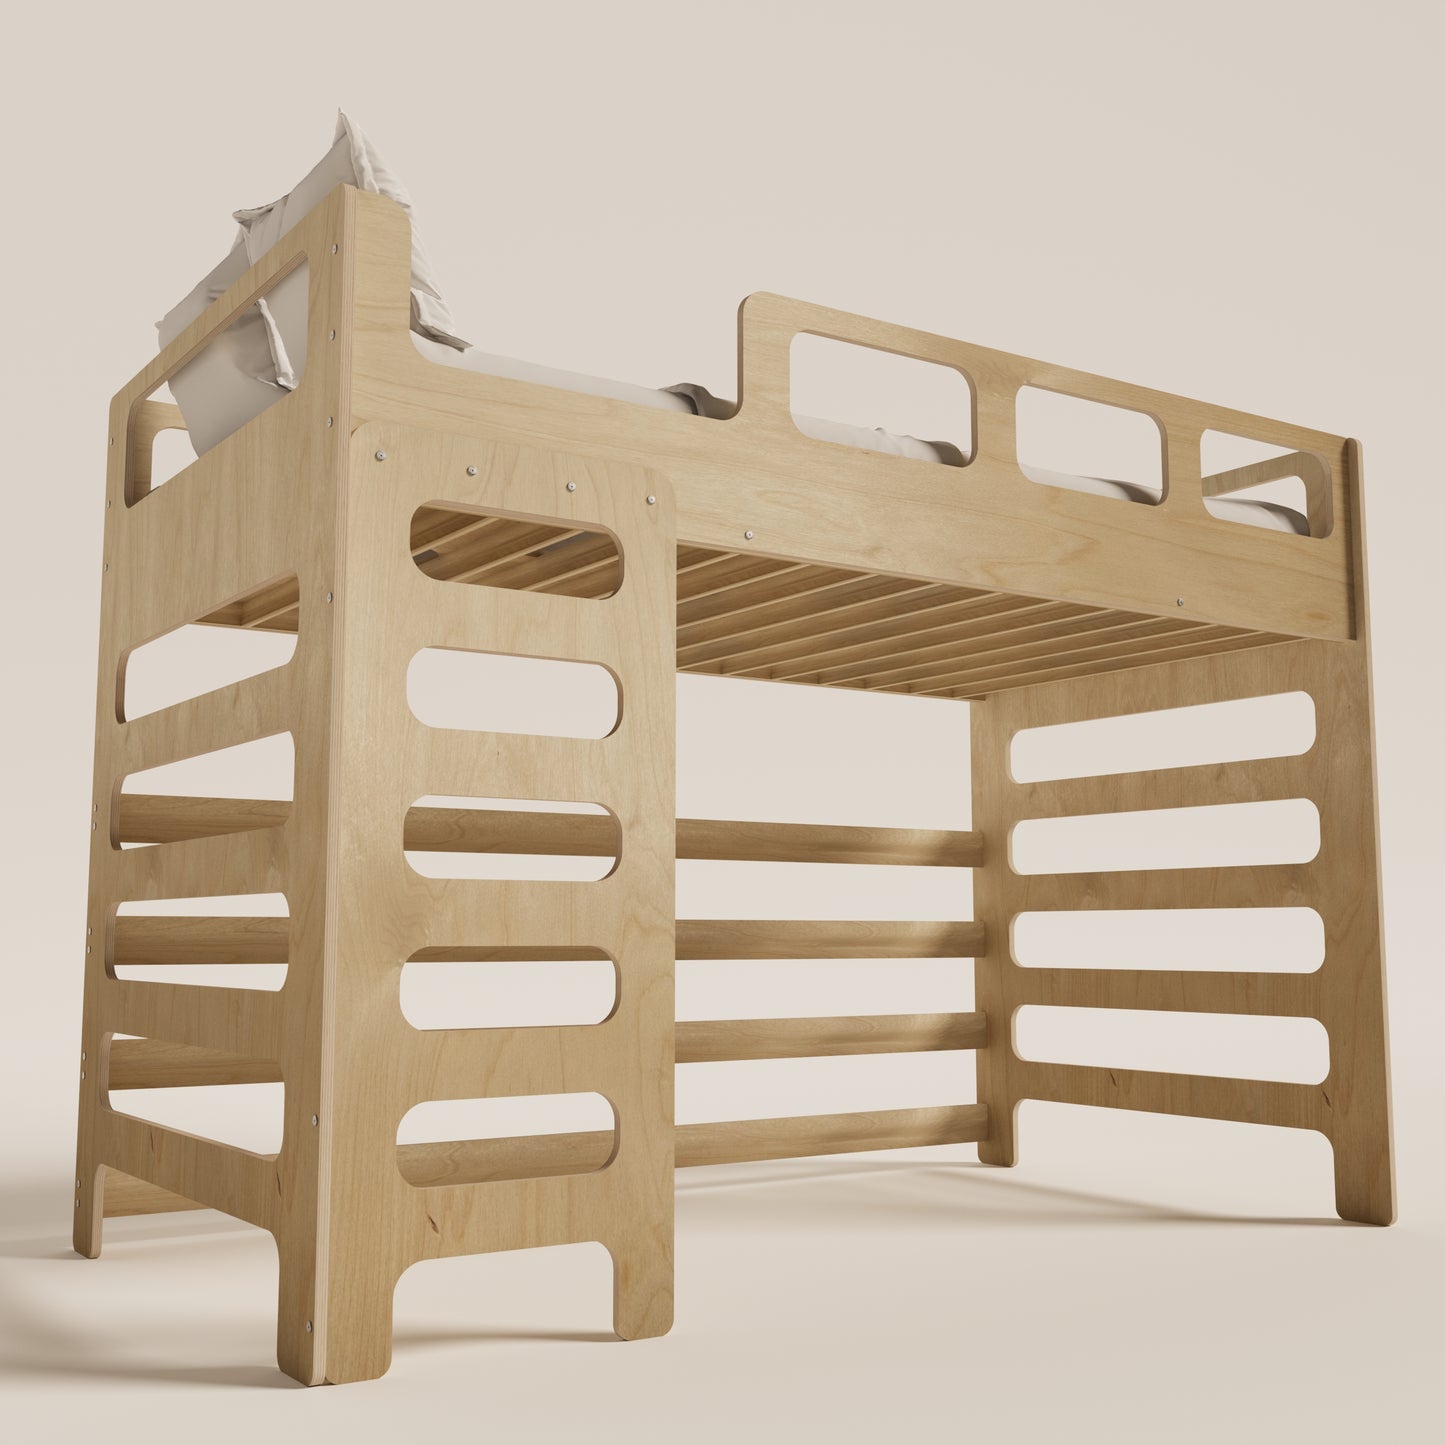 Loft Bed for Kids with Stairs - Montoddler 